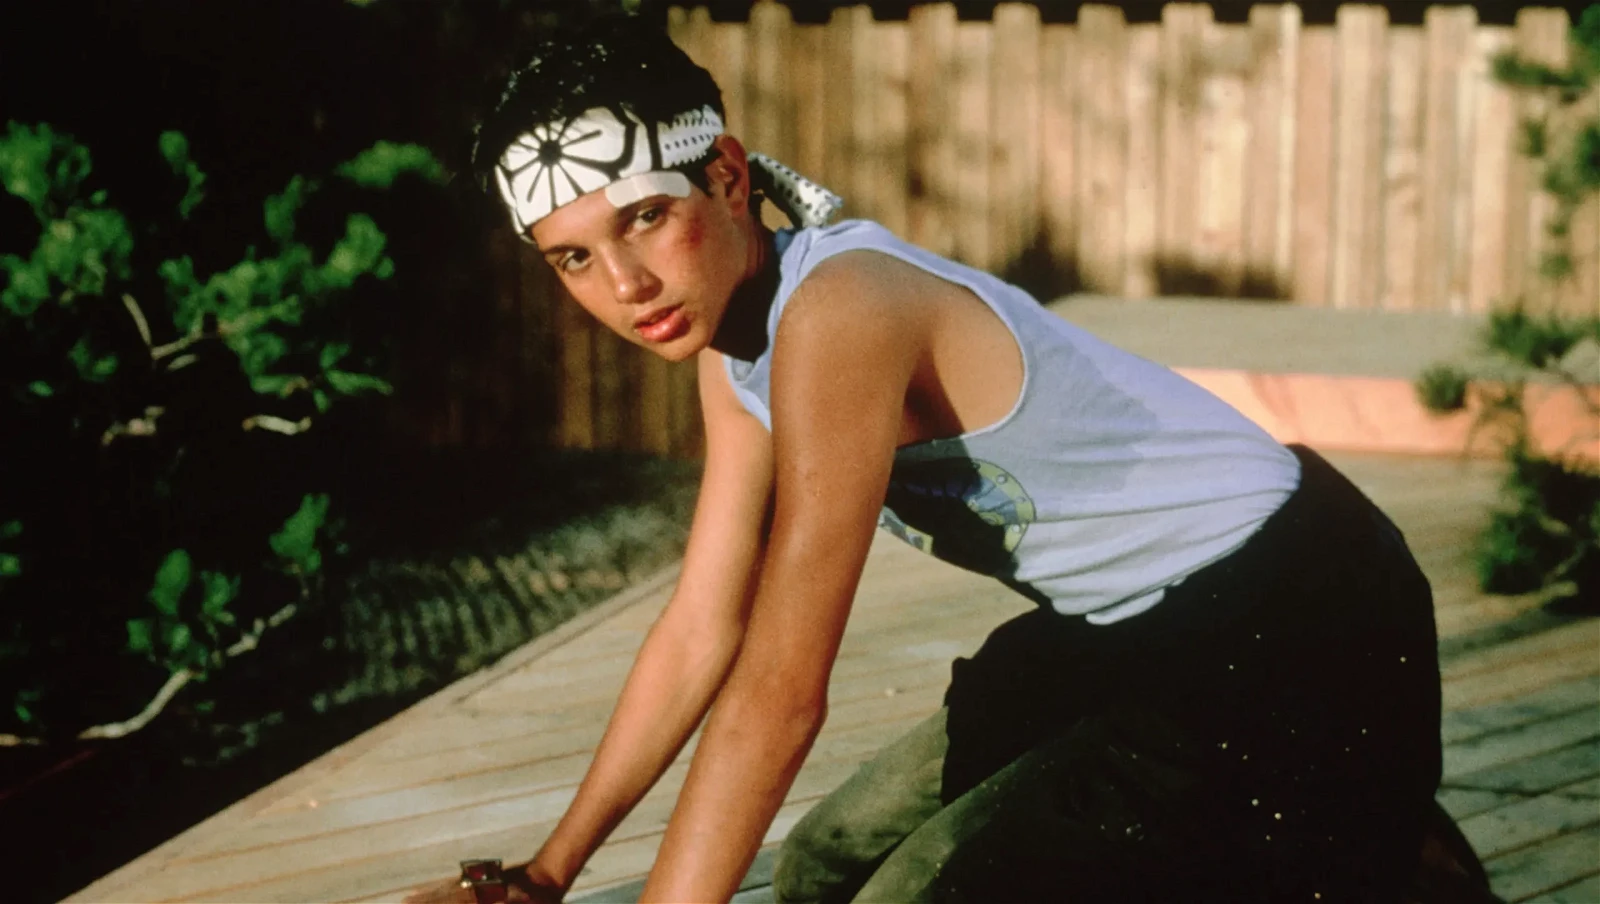 Ralph Macchio in a still from The Karate Kid